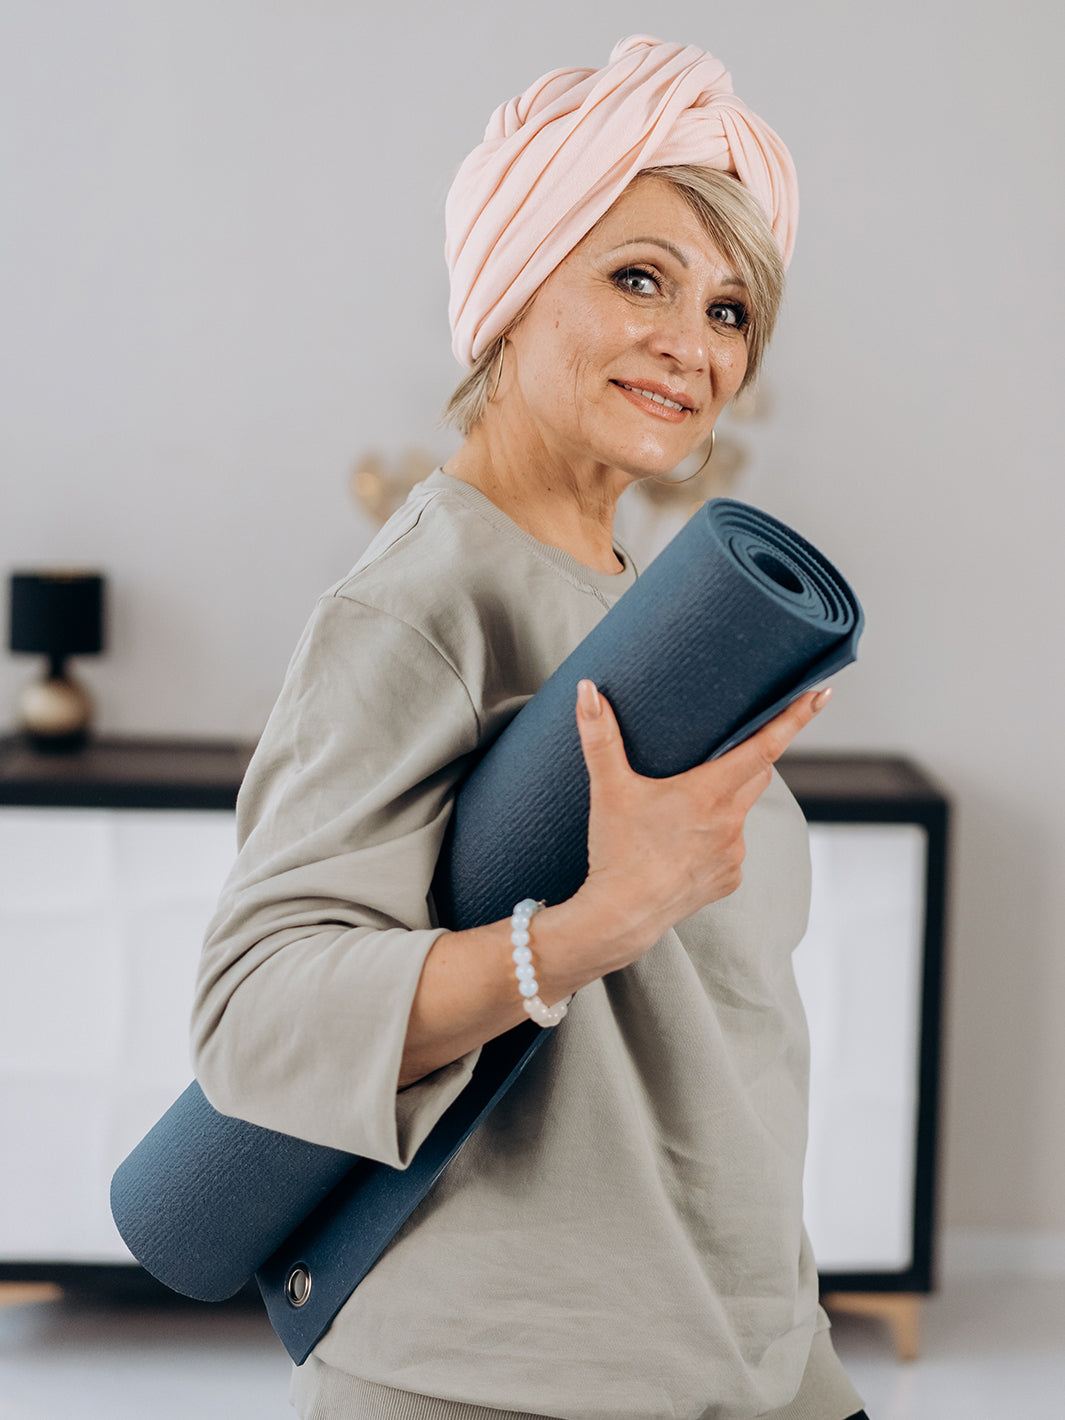 Smiling senior woman holding rolled yoga mat under her arm